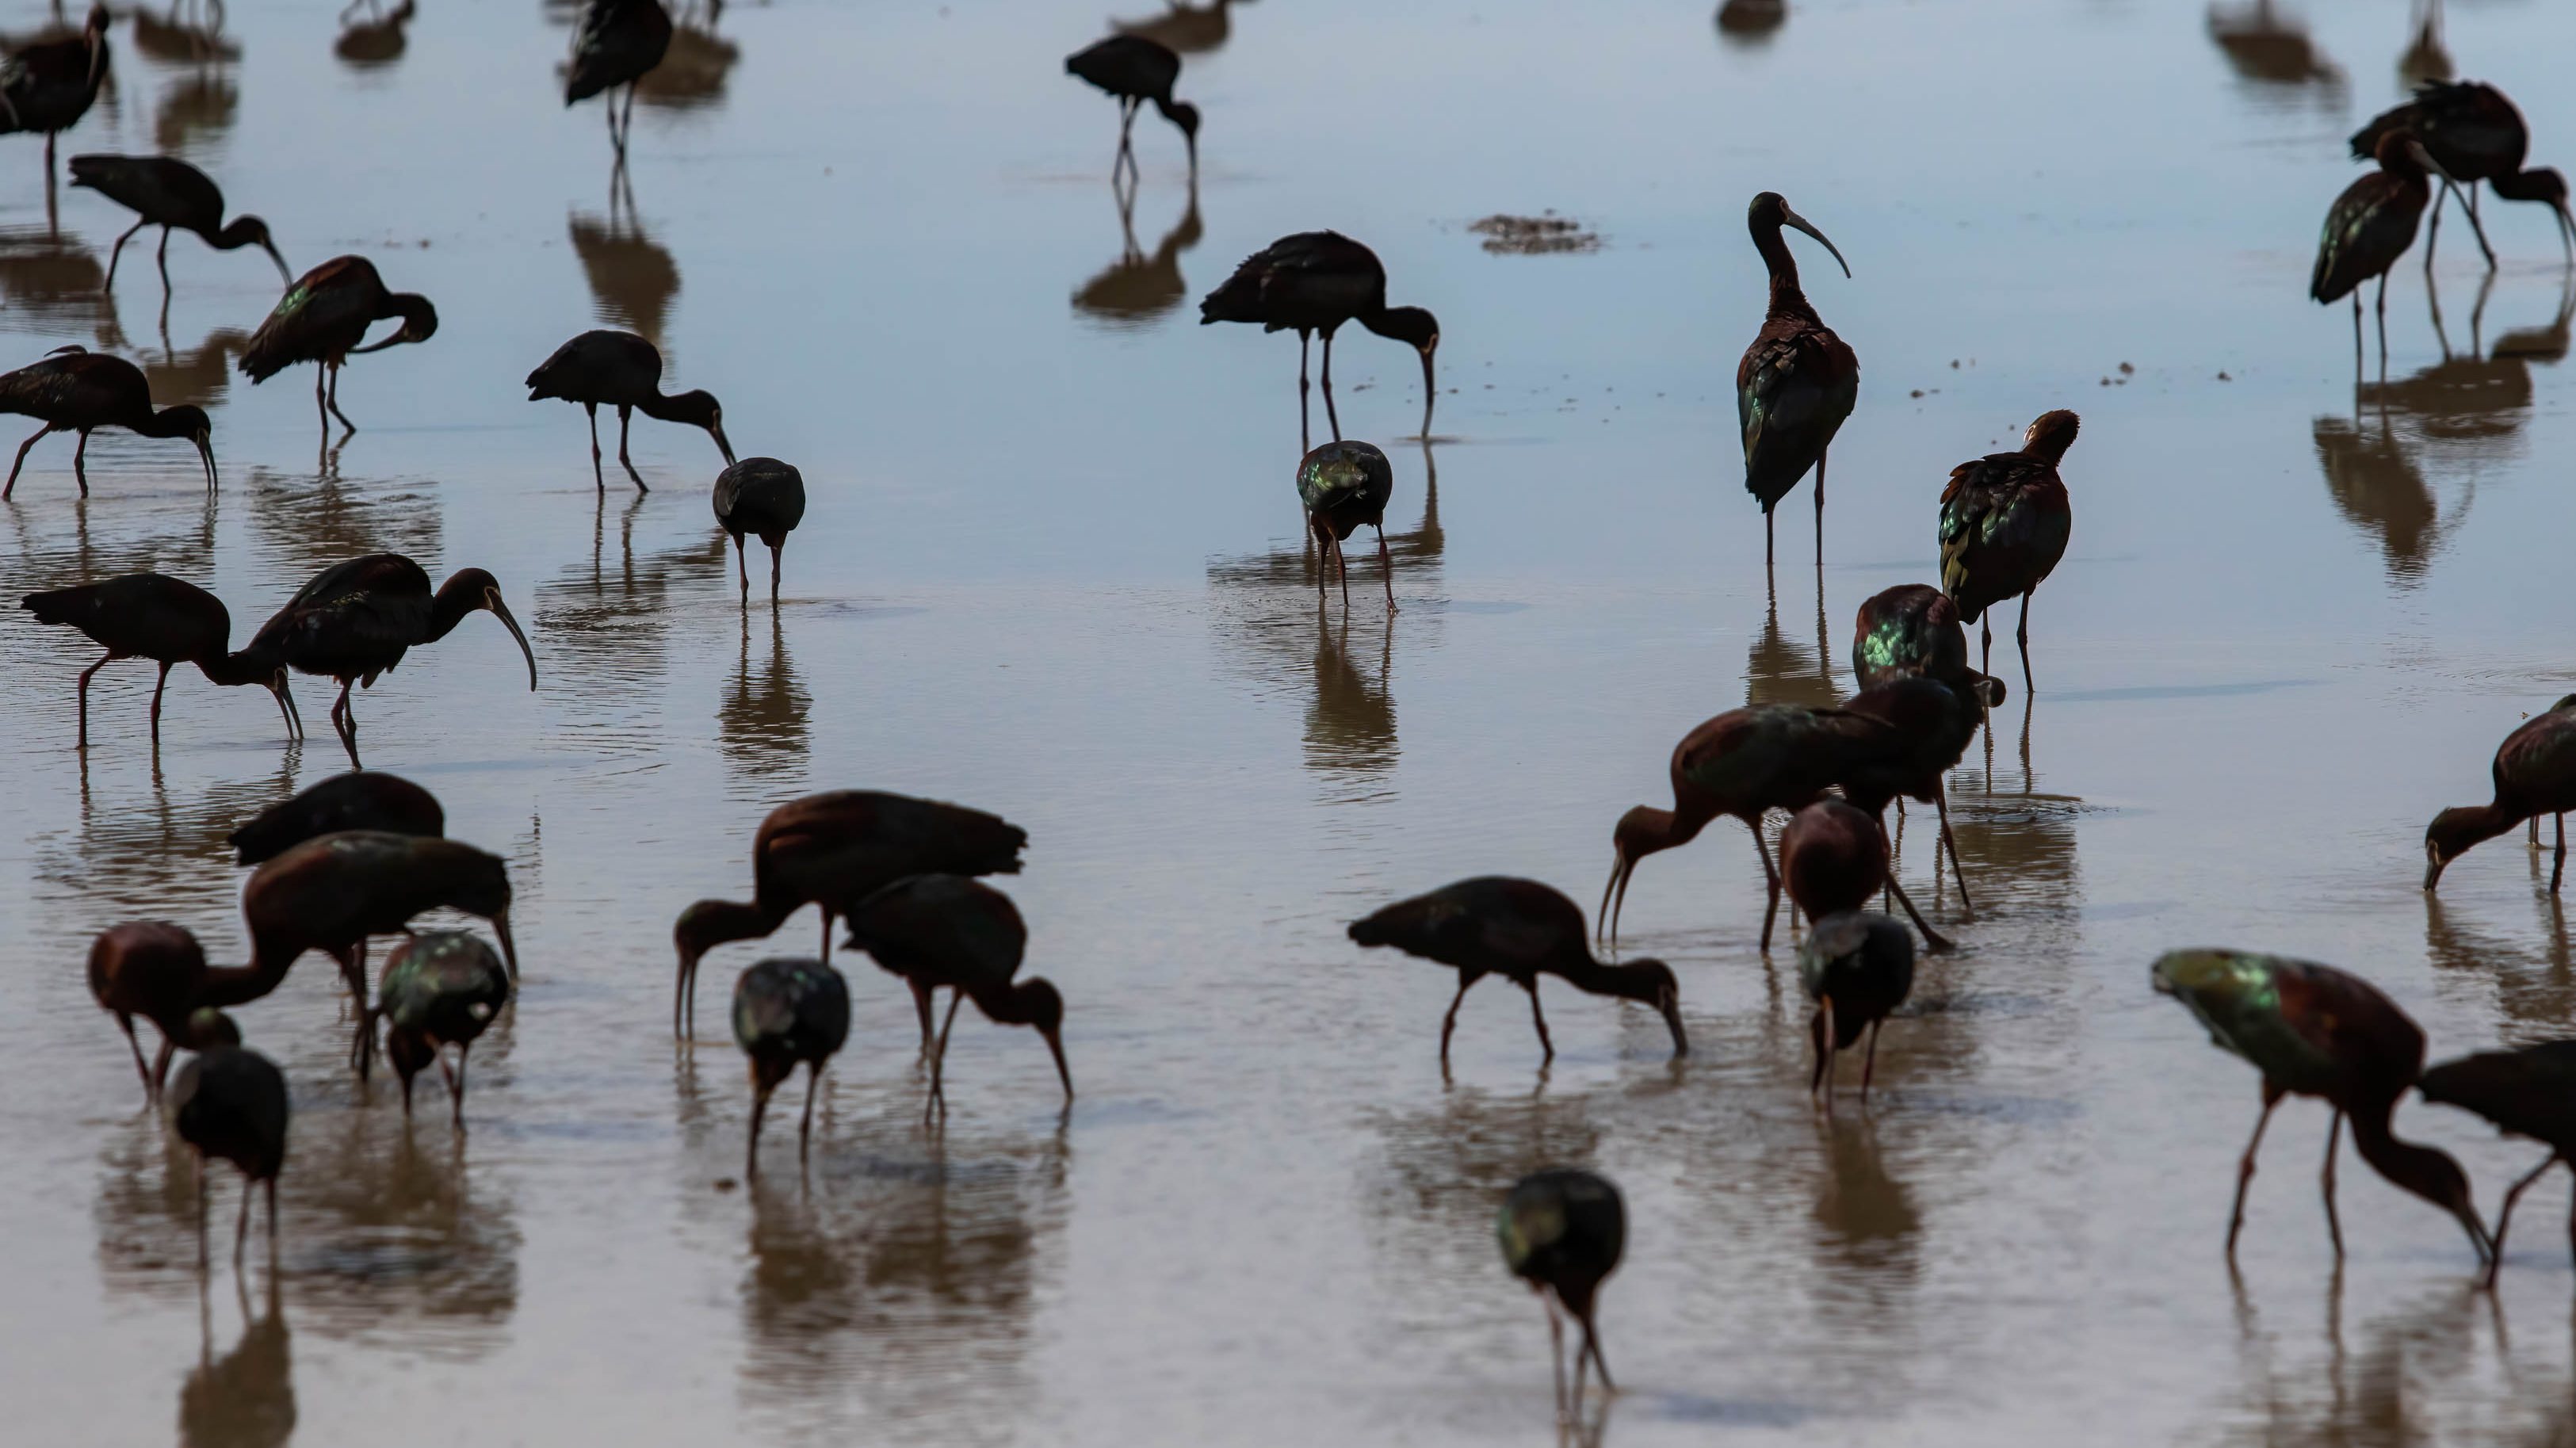 White Faced Ibis gather in a marsh along their migratory